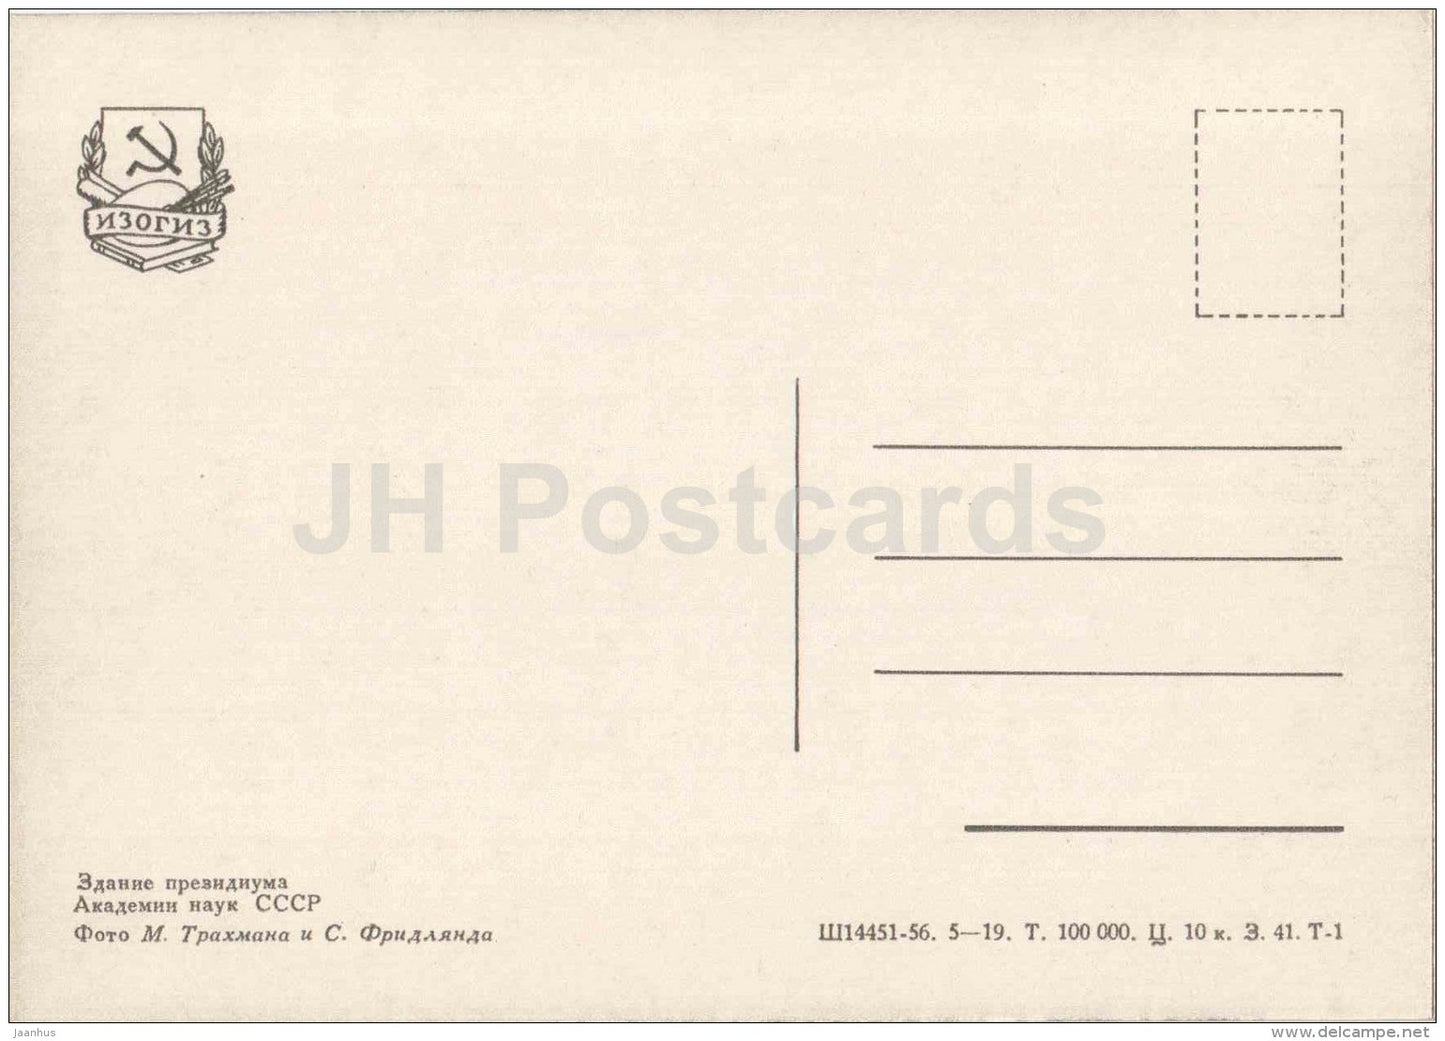 the building of the Presidium of the USSR Academy of Sciences - Moscow - 1957 - Russia USSR - unused - JH Postcards